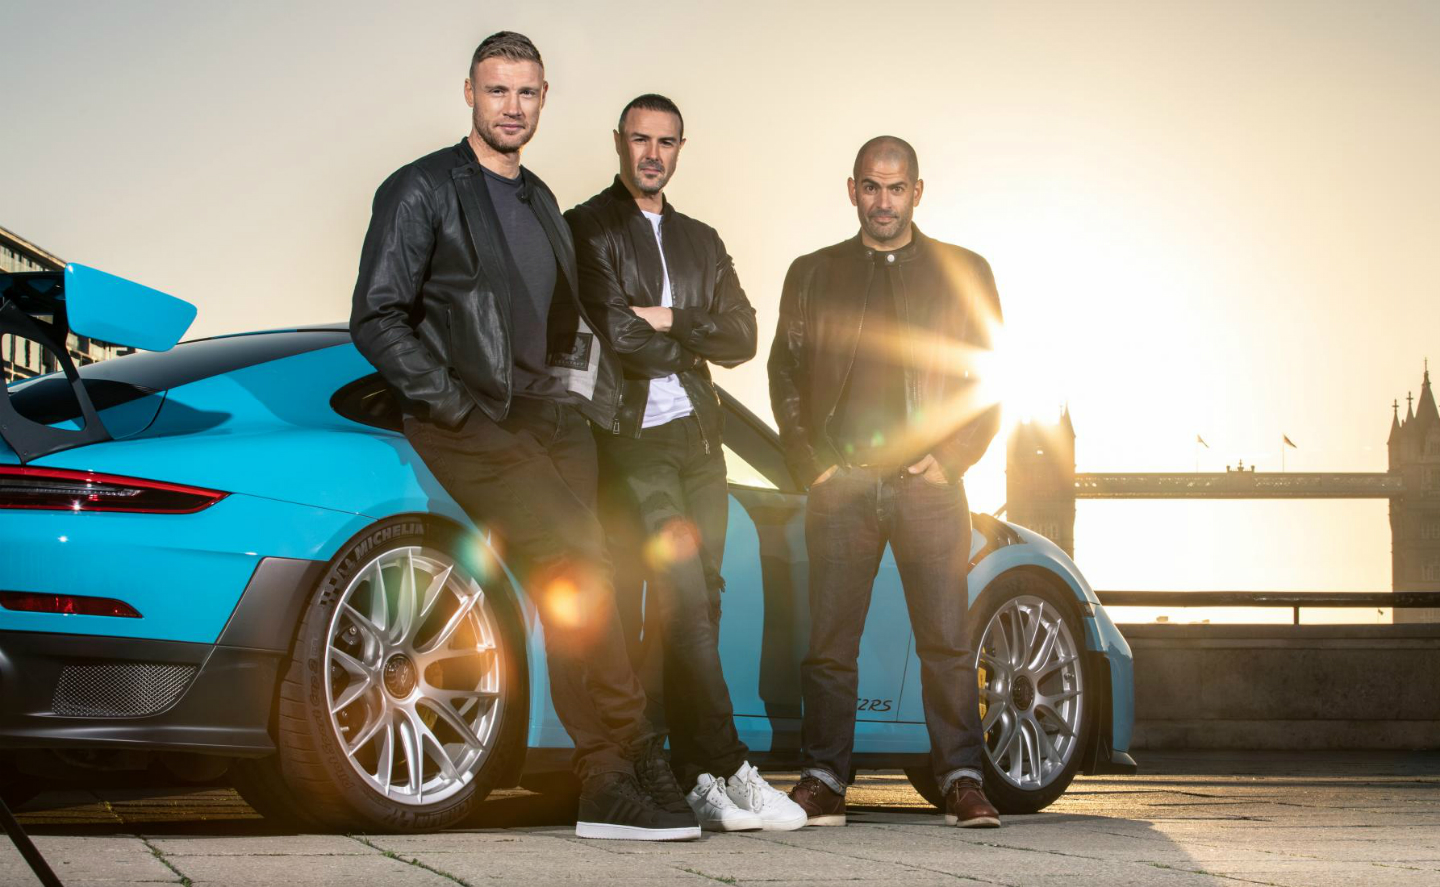 freddie flintoff, television, top gear, bbc: top gear tv show will not return for foreseeable future